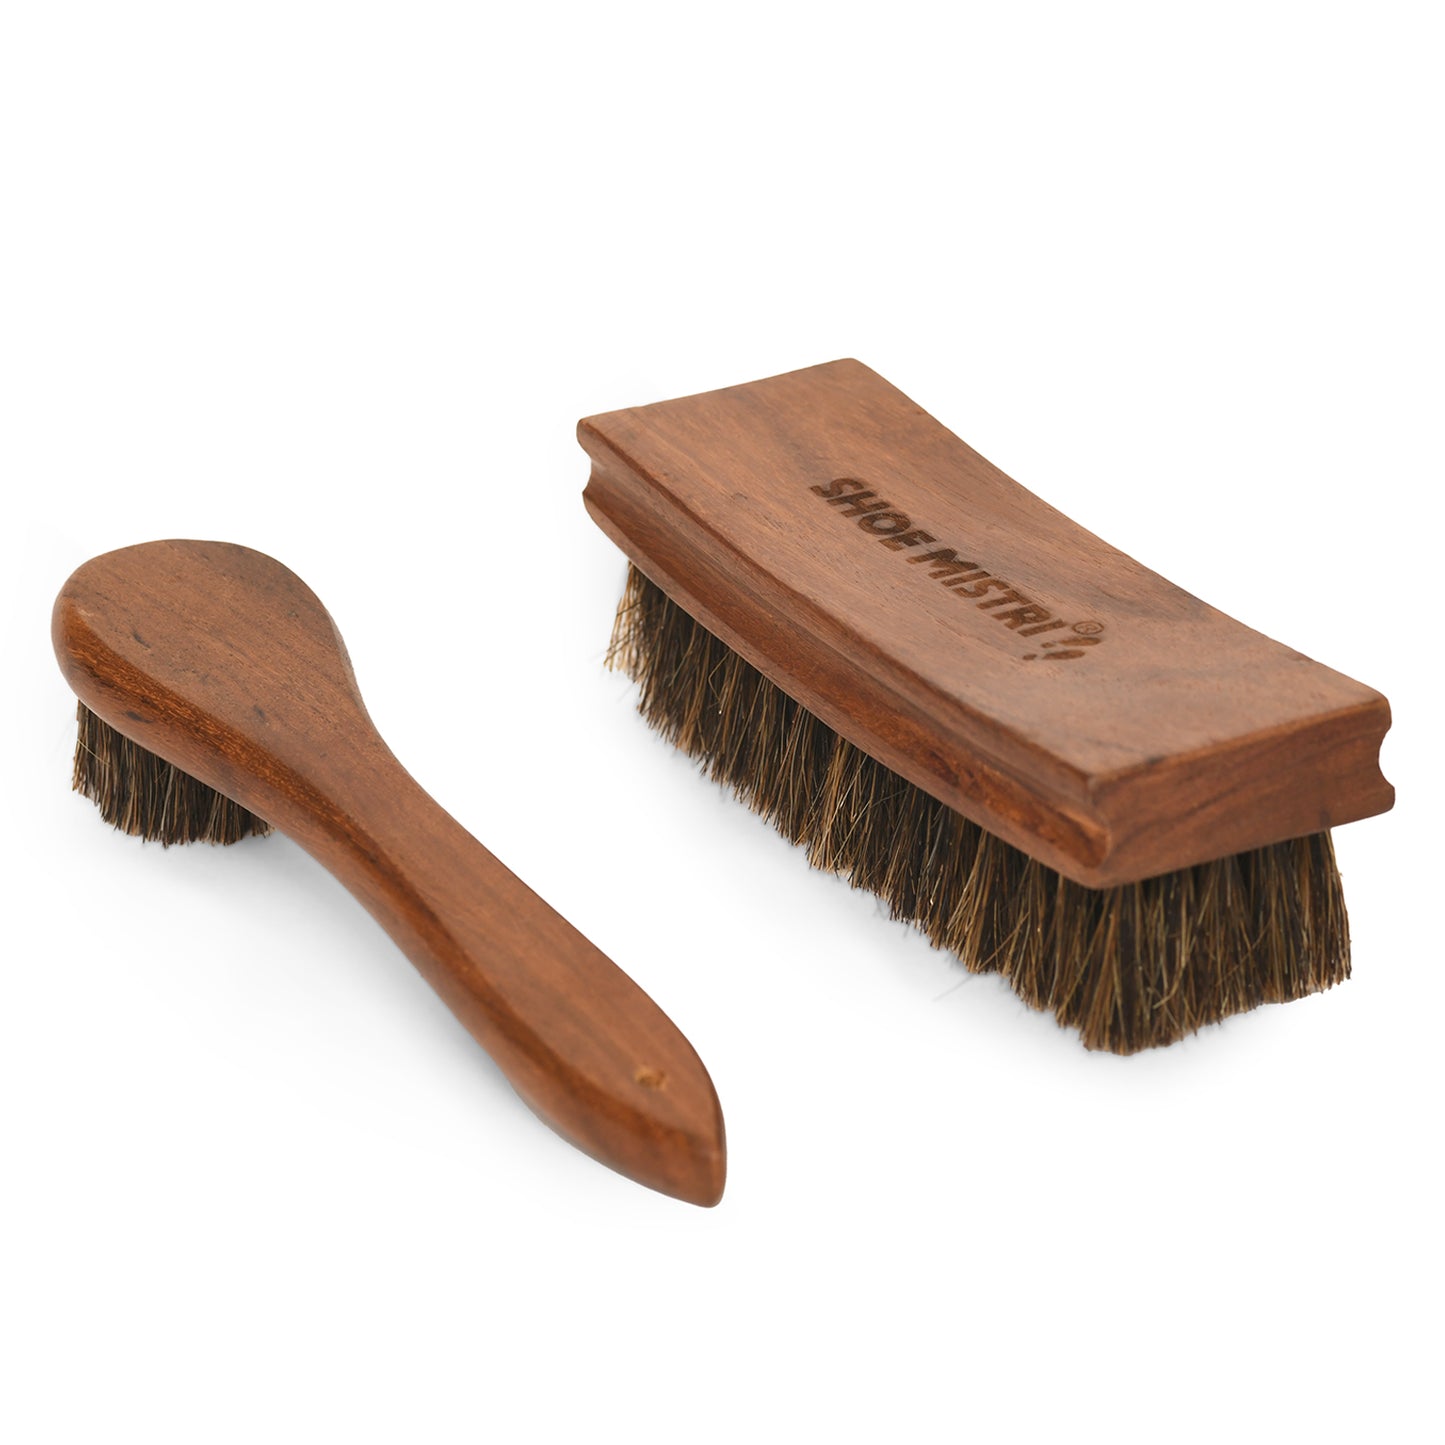 Shoe Mistri 100% Horsehair Curved Shoe Application & Horse Hair Brush Combo with Concave Handle for Premium Grip - Suitable for Brushing, Buffing and Shining